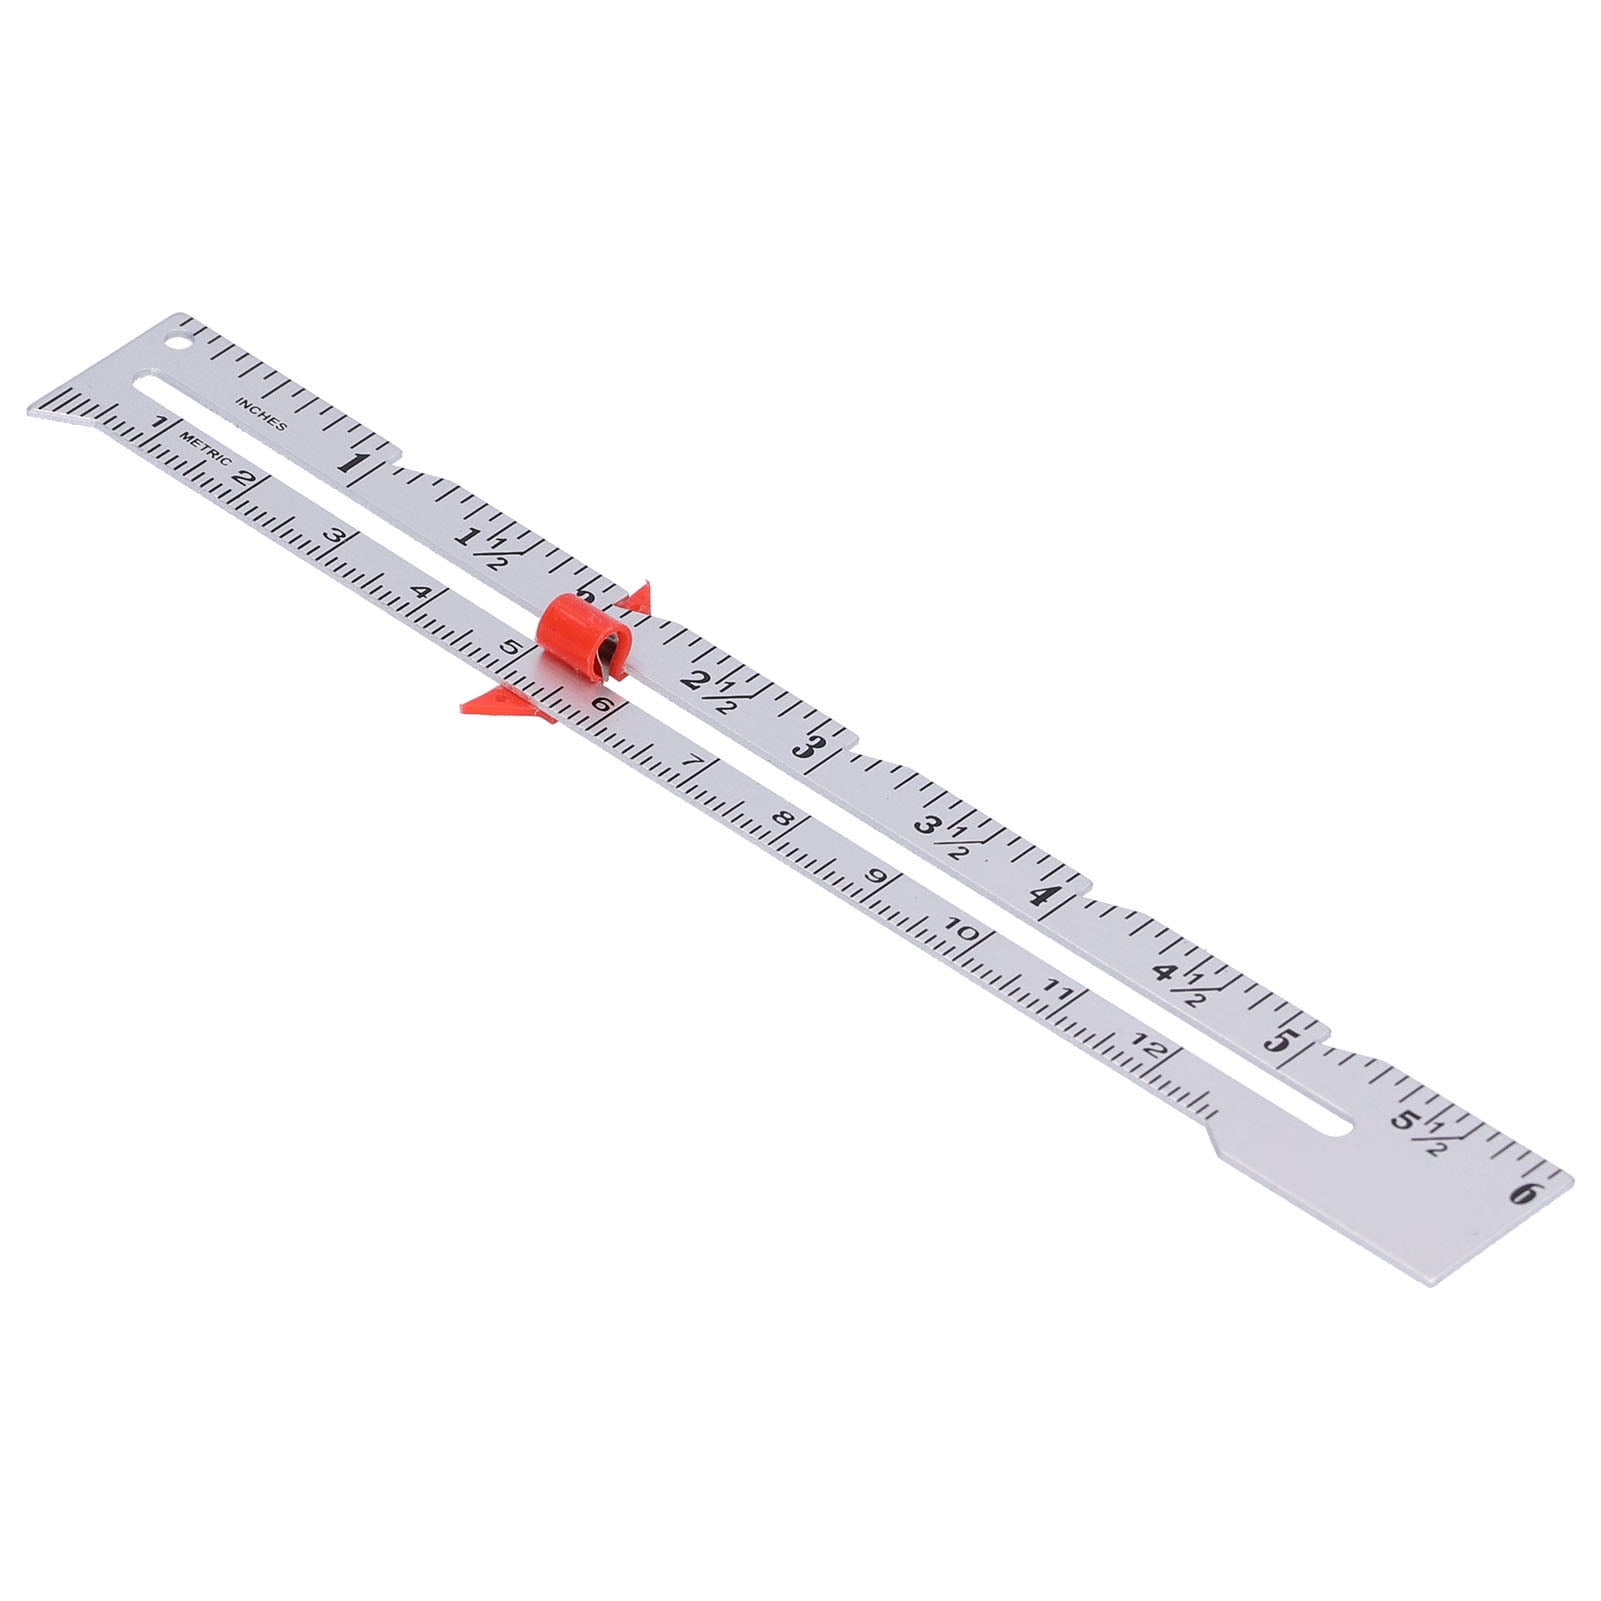 Measuring Tools in Sewing